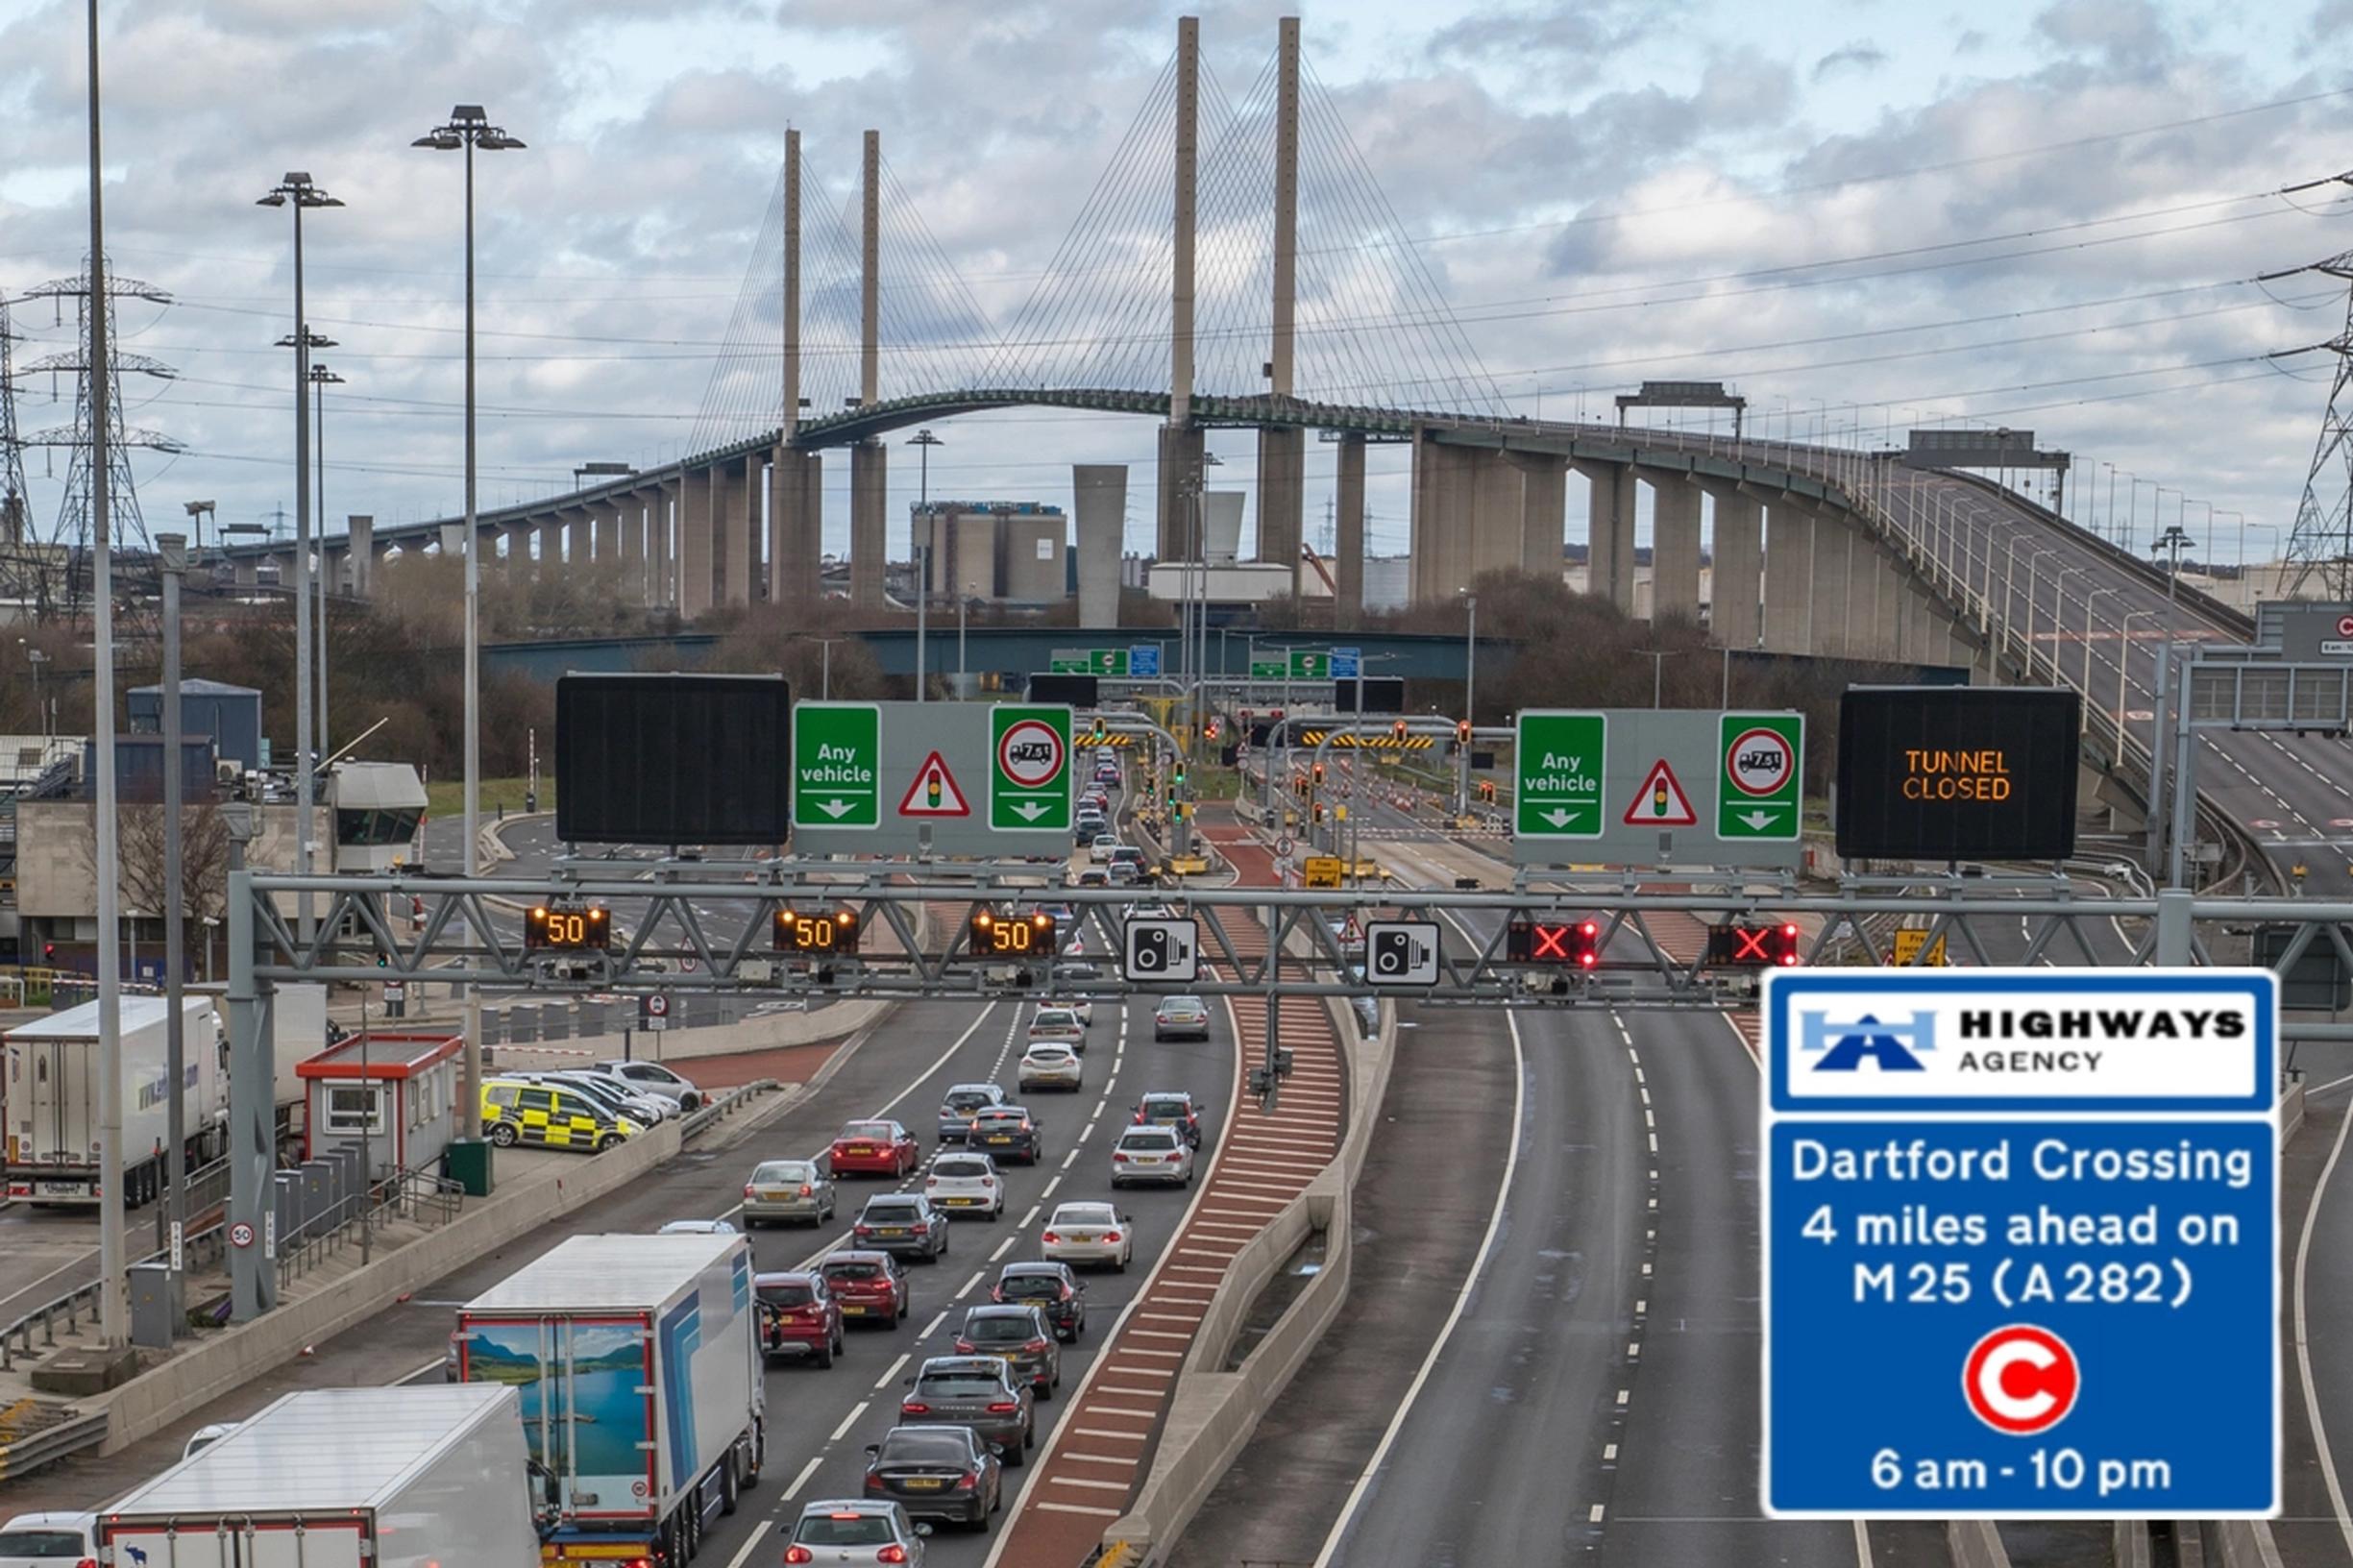 The Highways Agency has experience of road user charging through its operation of the Dartford crossings